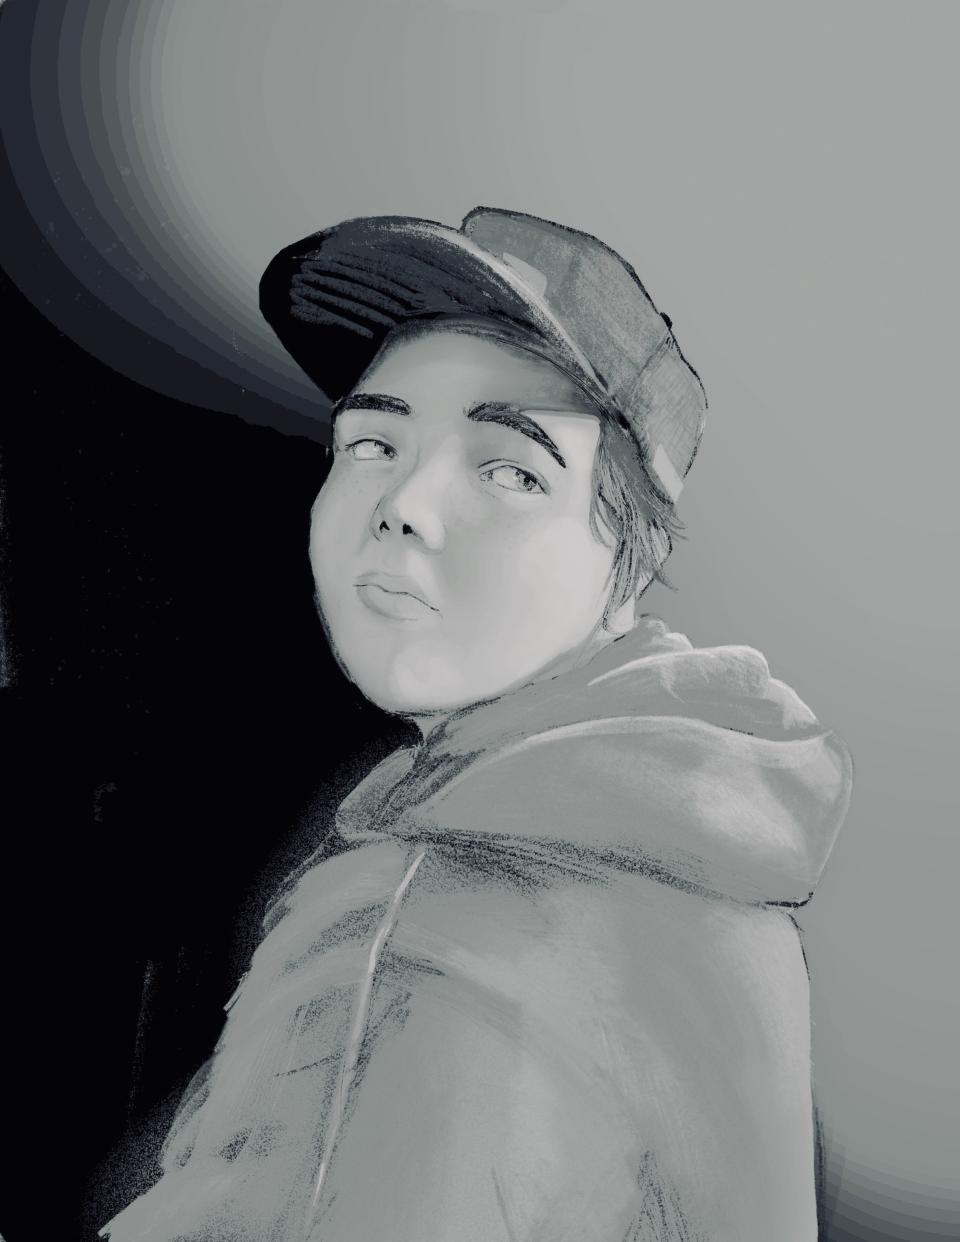 Self Portrait, digital painting and drawing from Hagerstown Community College student Abbey Whittington.